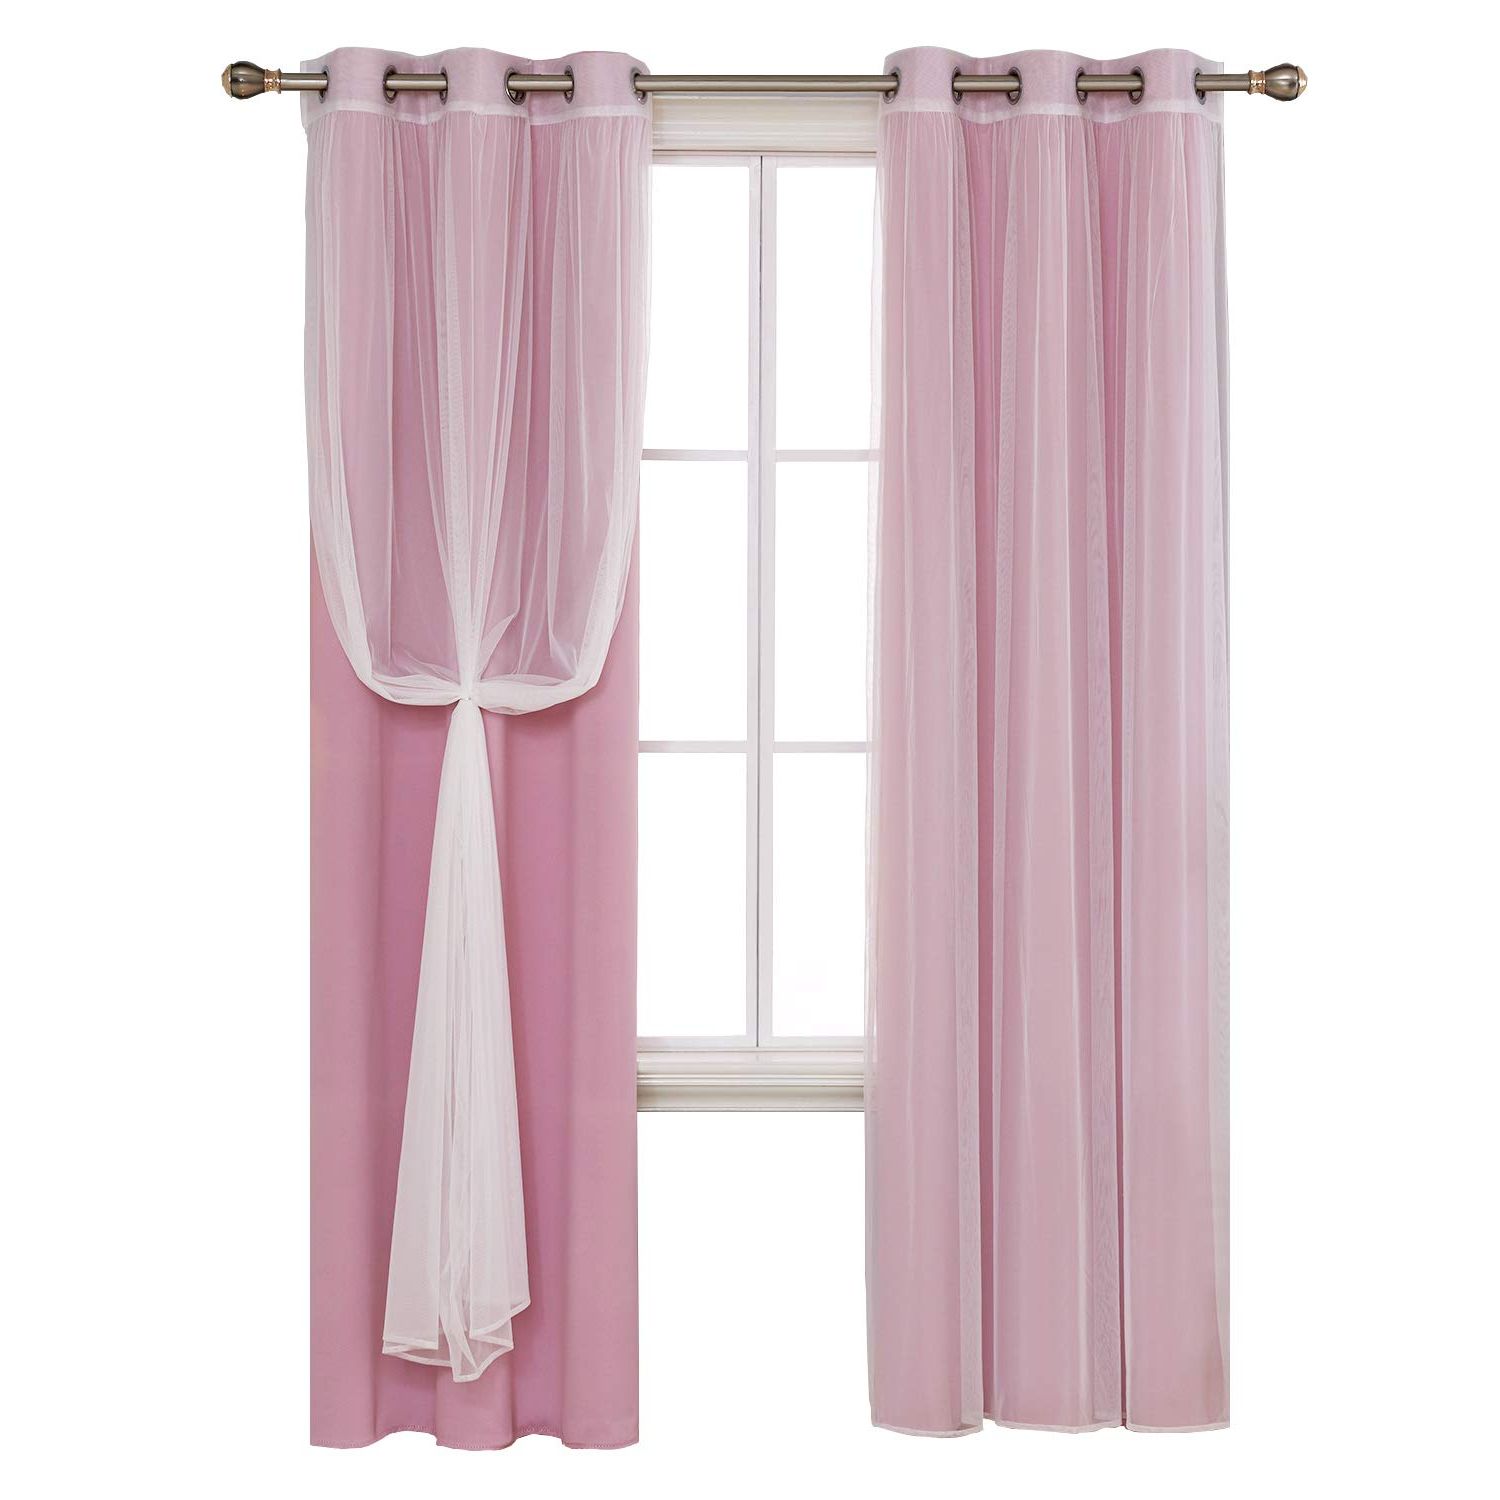 Deconovo Grommet Top Mix And Match Thermal Insulted Blackout Curtains Sets  With 2 Blackout Curtains And 2 Tulle White Sheer Panels For Living Room 38 Throughout Well Known Mix And Match Blackout Blackout Curtains Panel Sets (View 11 of 20)